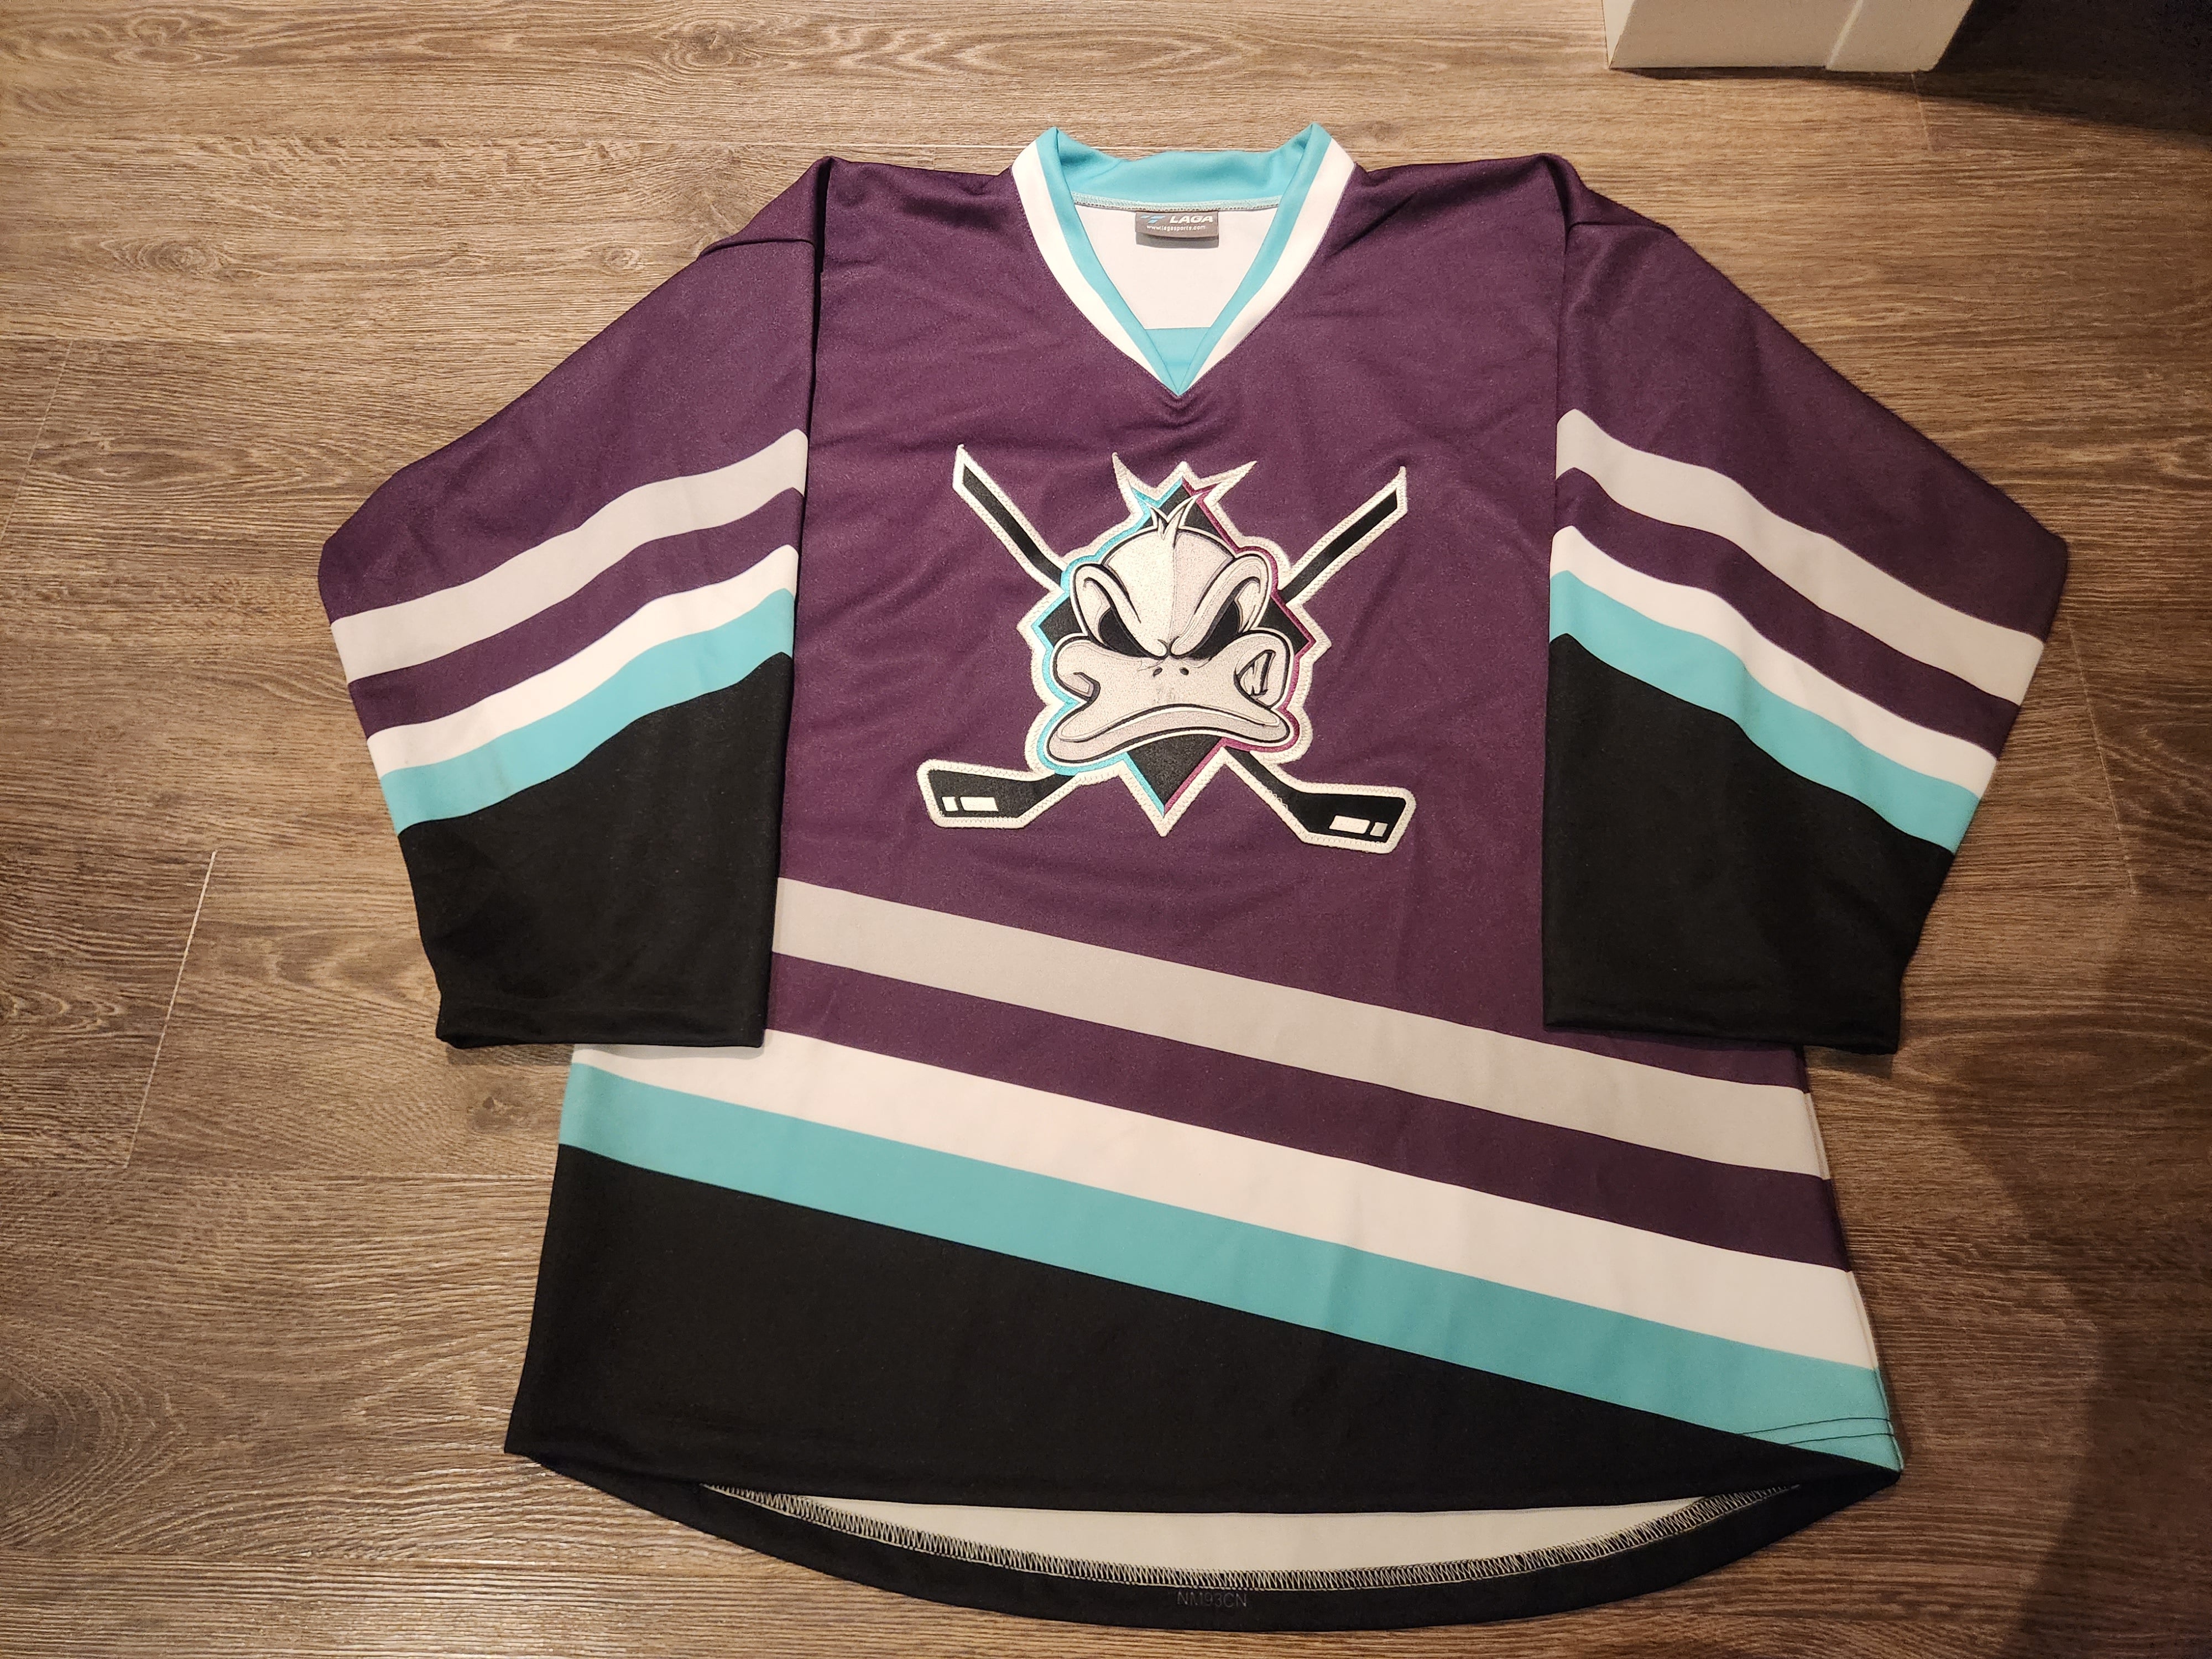 Anaheim Ducks arrive to game in Mighty Ducks jerseys to celebrate pending  release of Disney+ TV series